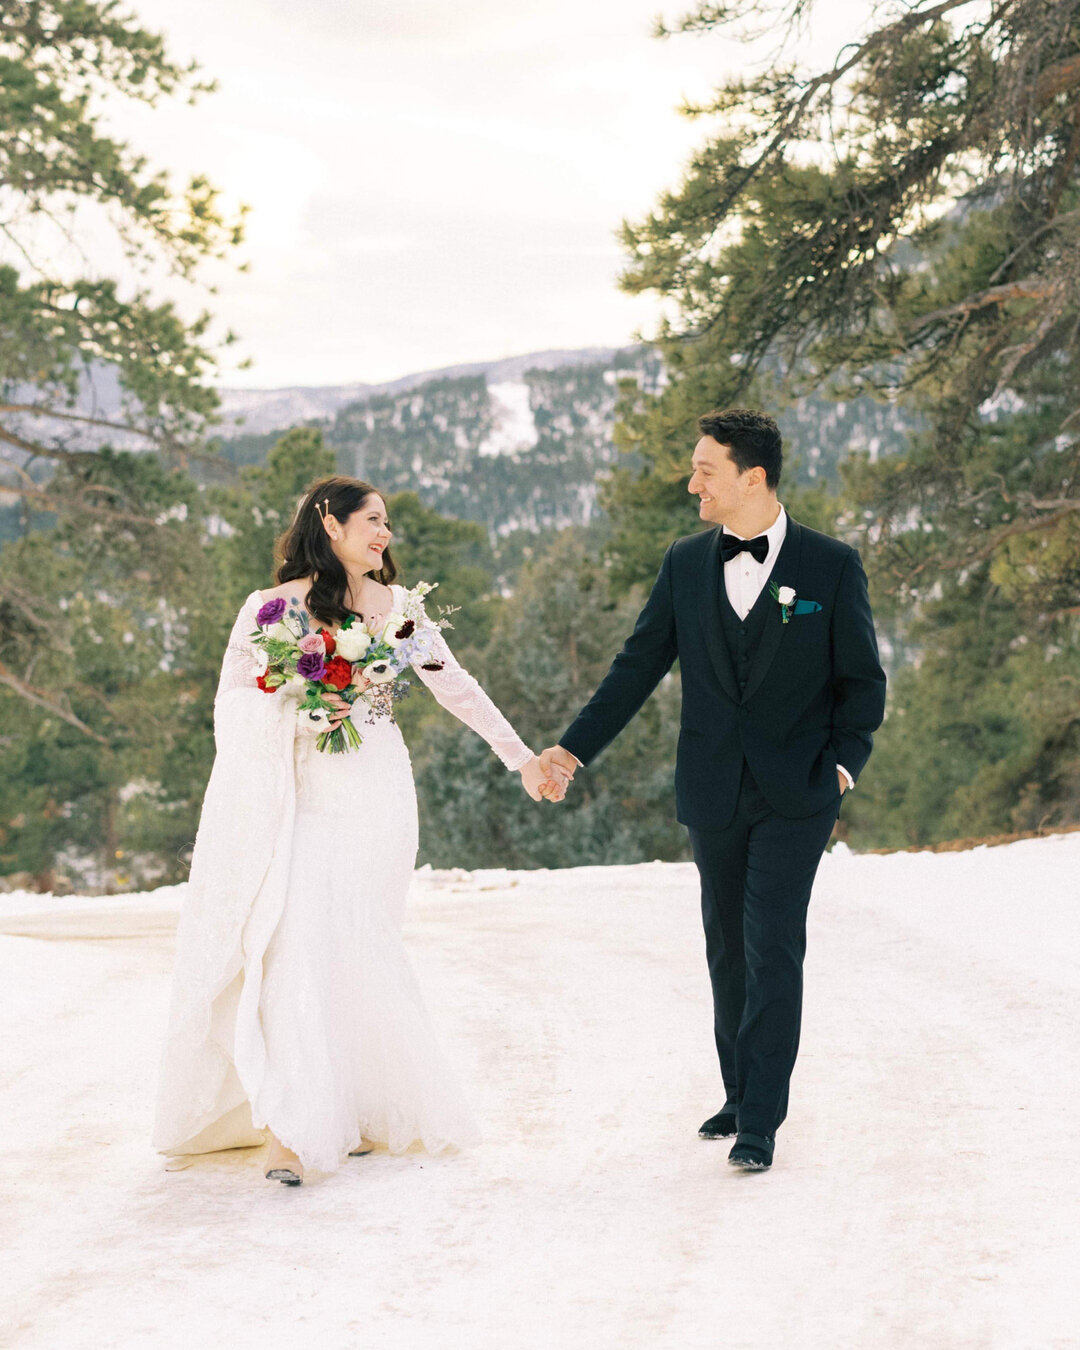 Kristen and Marcus said their I DO&rsquo;s at the beautiful @blackcanyonn inn in Estes Park. The whole day was a mix of excitement, fun, and happiness and I was so glad that I was able to document it on both digital and film. ​​​​​​​​
​​​​​​​​
Film L